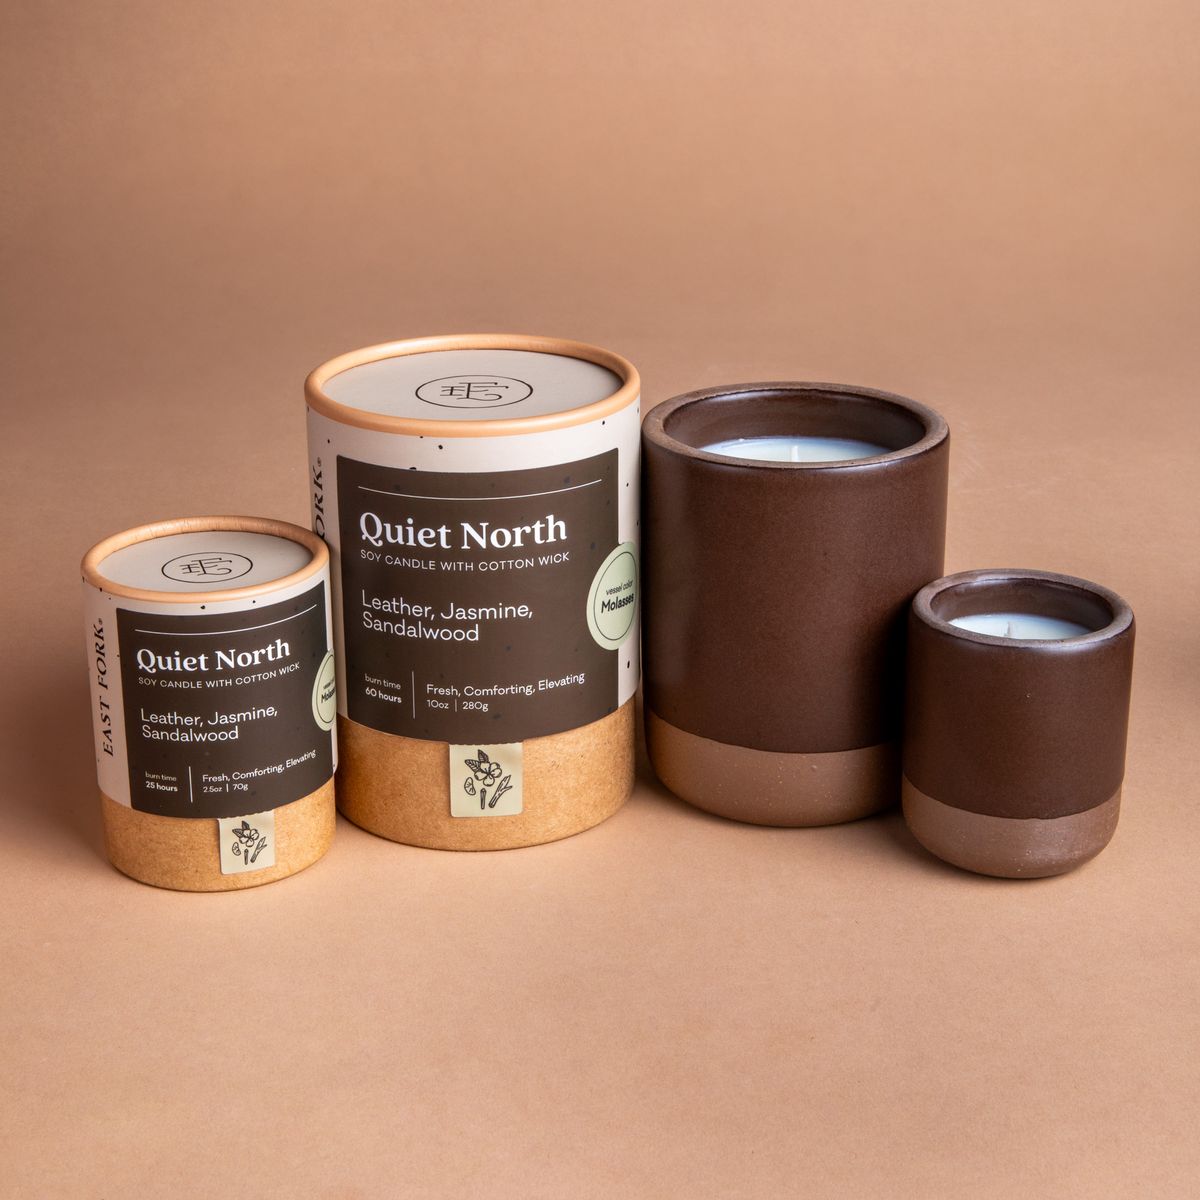 Small and large ceramic vessel next to each other in a dark brown color with candles inside each. Cardboard tube packaging is on the left with branding stickers that say "Quiet North".